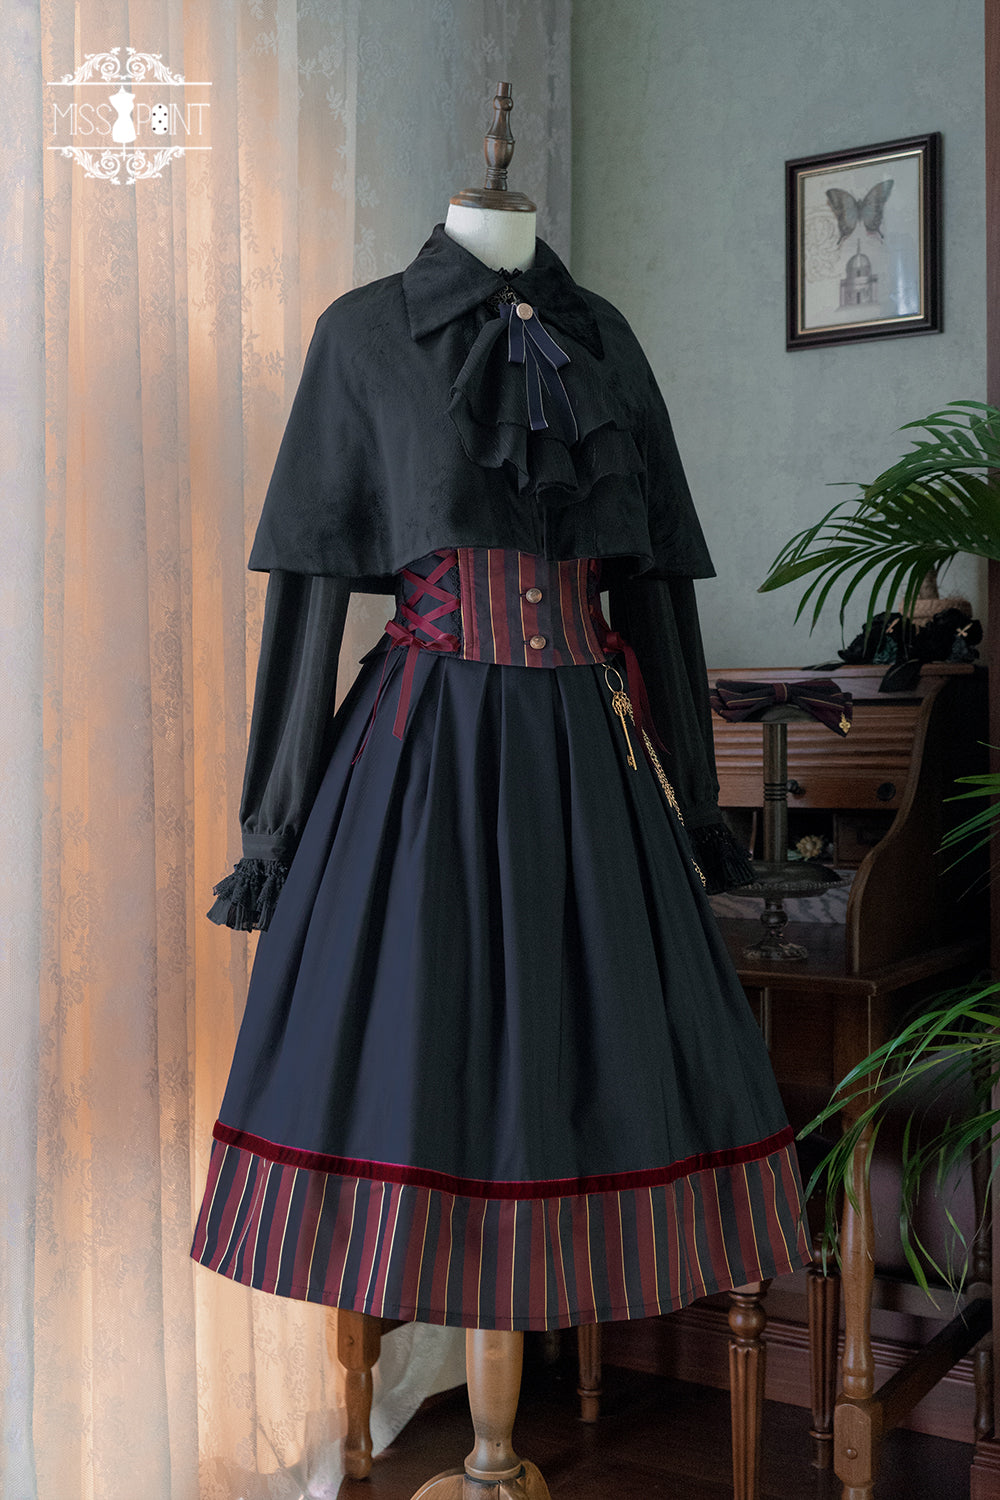 Gothic Lolita vertical striped skirt and vest of the feudal lord